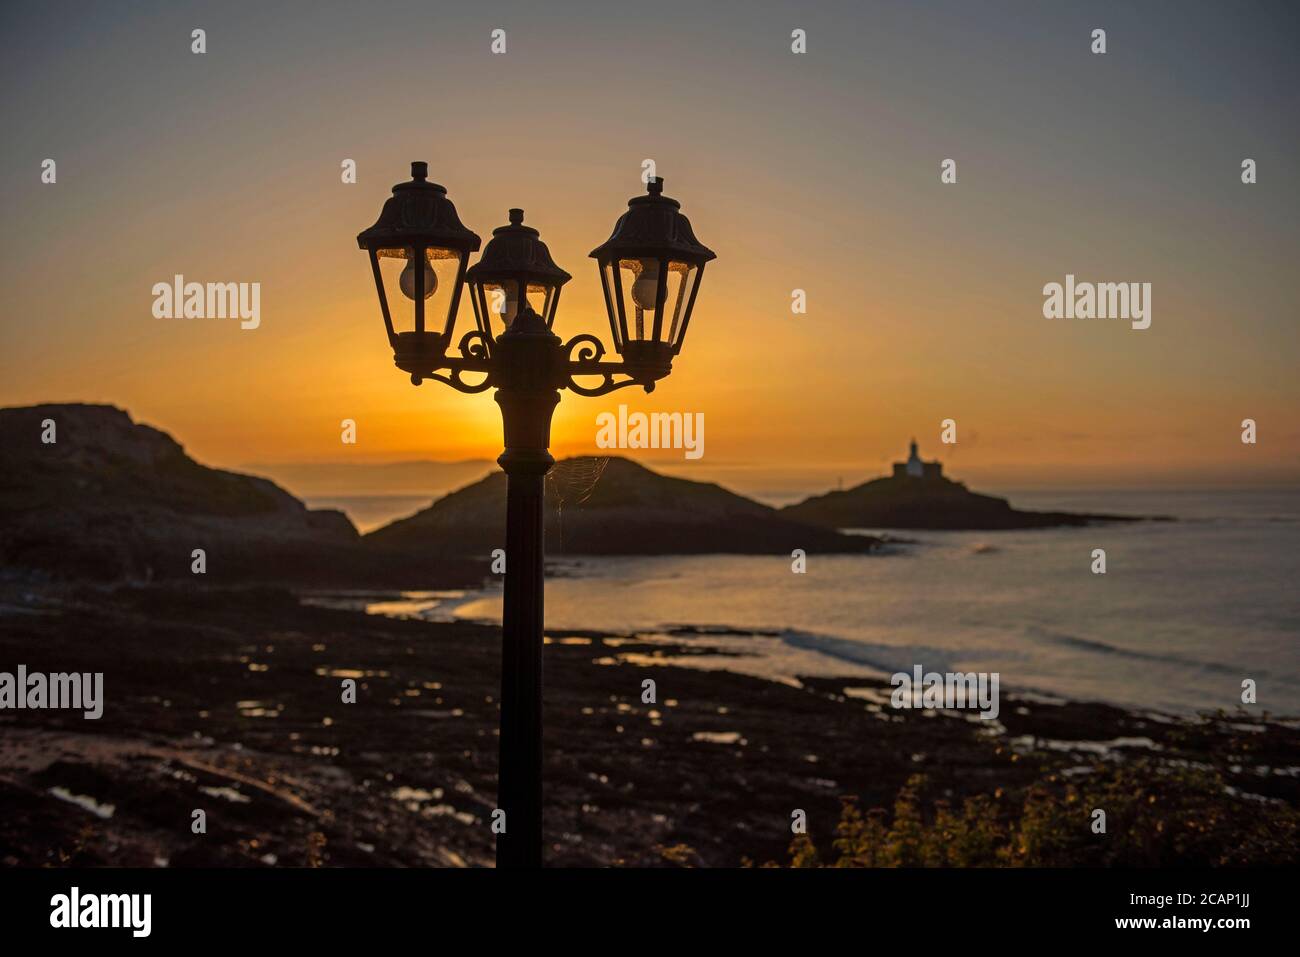 Mumbles, Swansea, UK. 8th Aug, 2020. The sun rises over the Mumbles Lighthouse near Swansea this morning as seen from outside Castellamare Restaurant at the start of a stunning UK summers day. Credit: Phil Rees/Alamy Live News Stock Photo